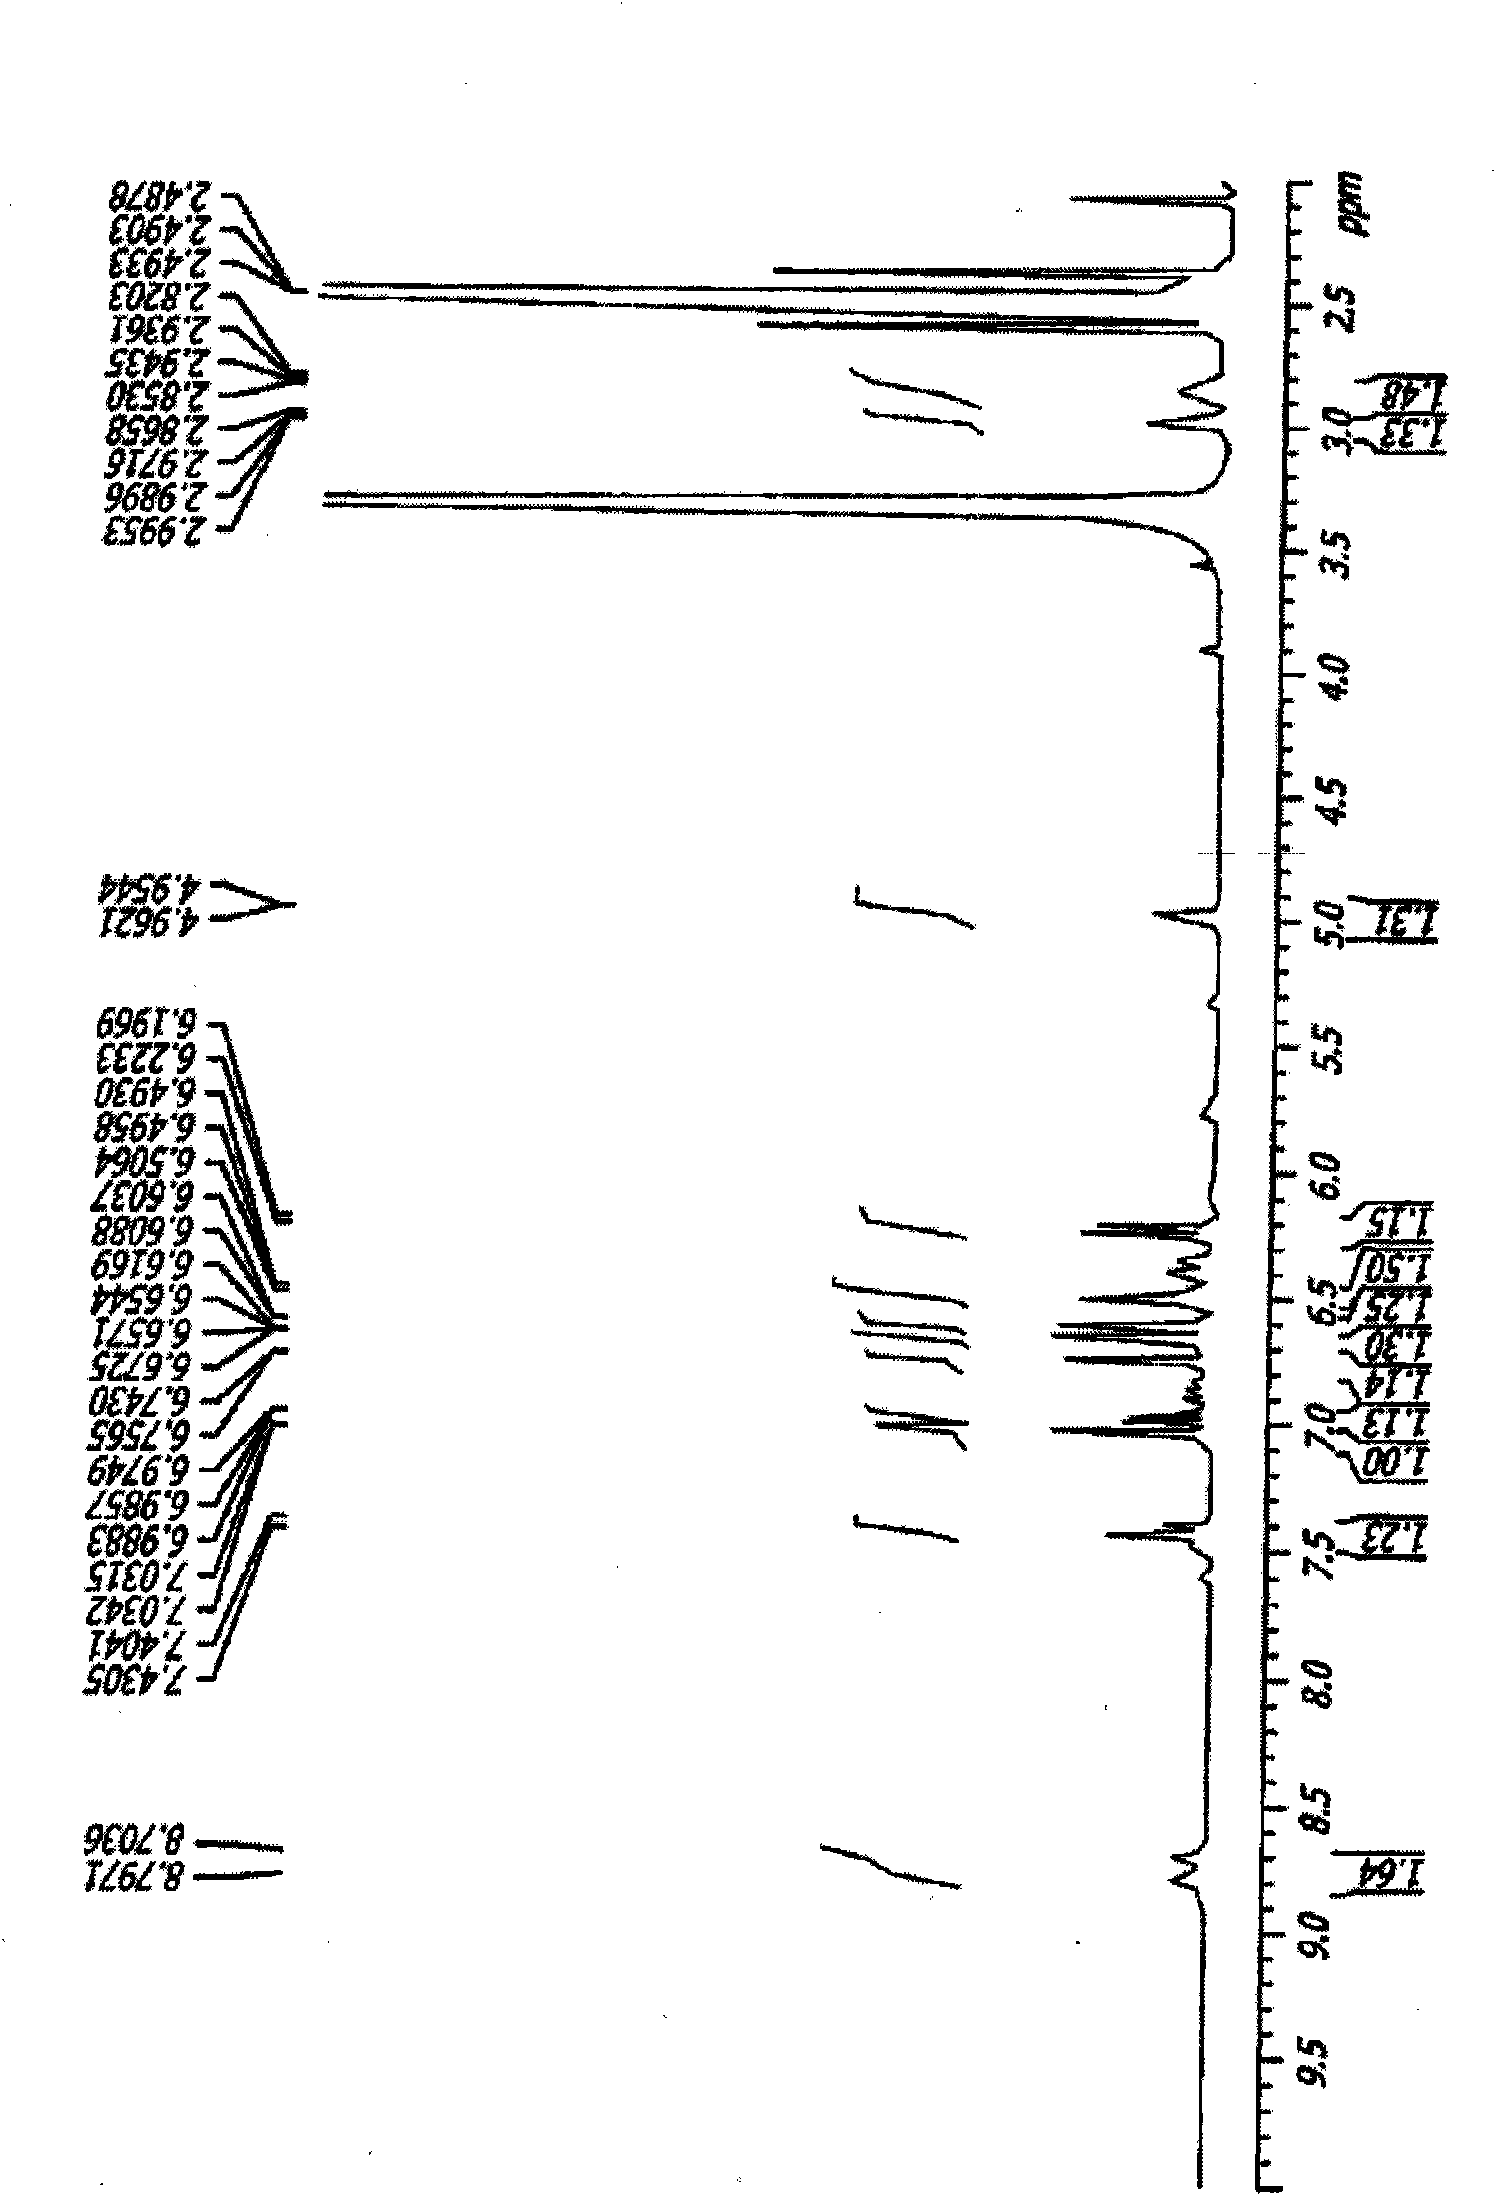 Compositions and methods for treating inflammation and inflammation-related disorders by plectranthus amboinicus extracts